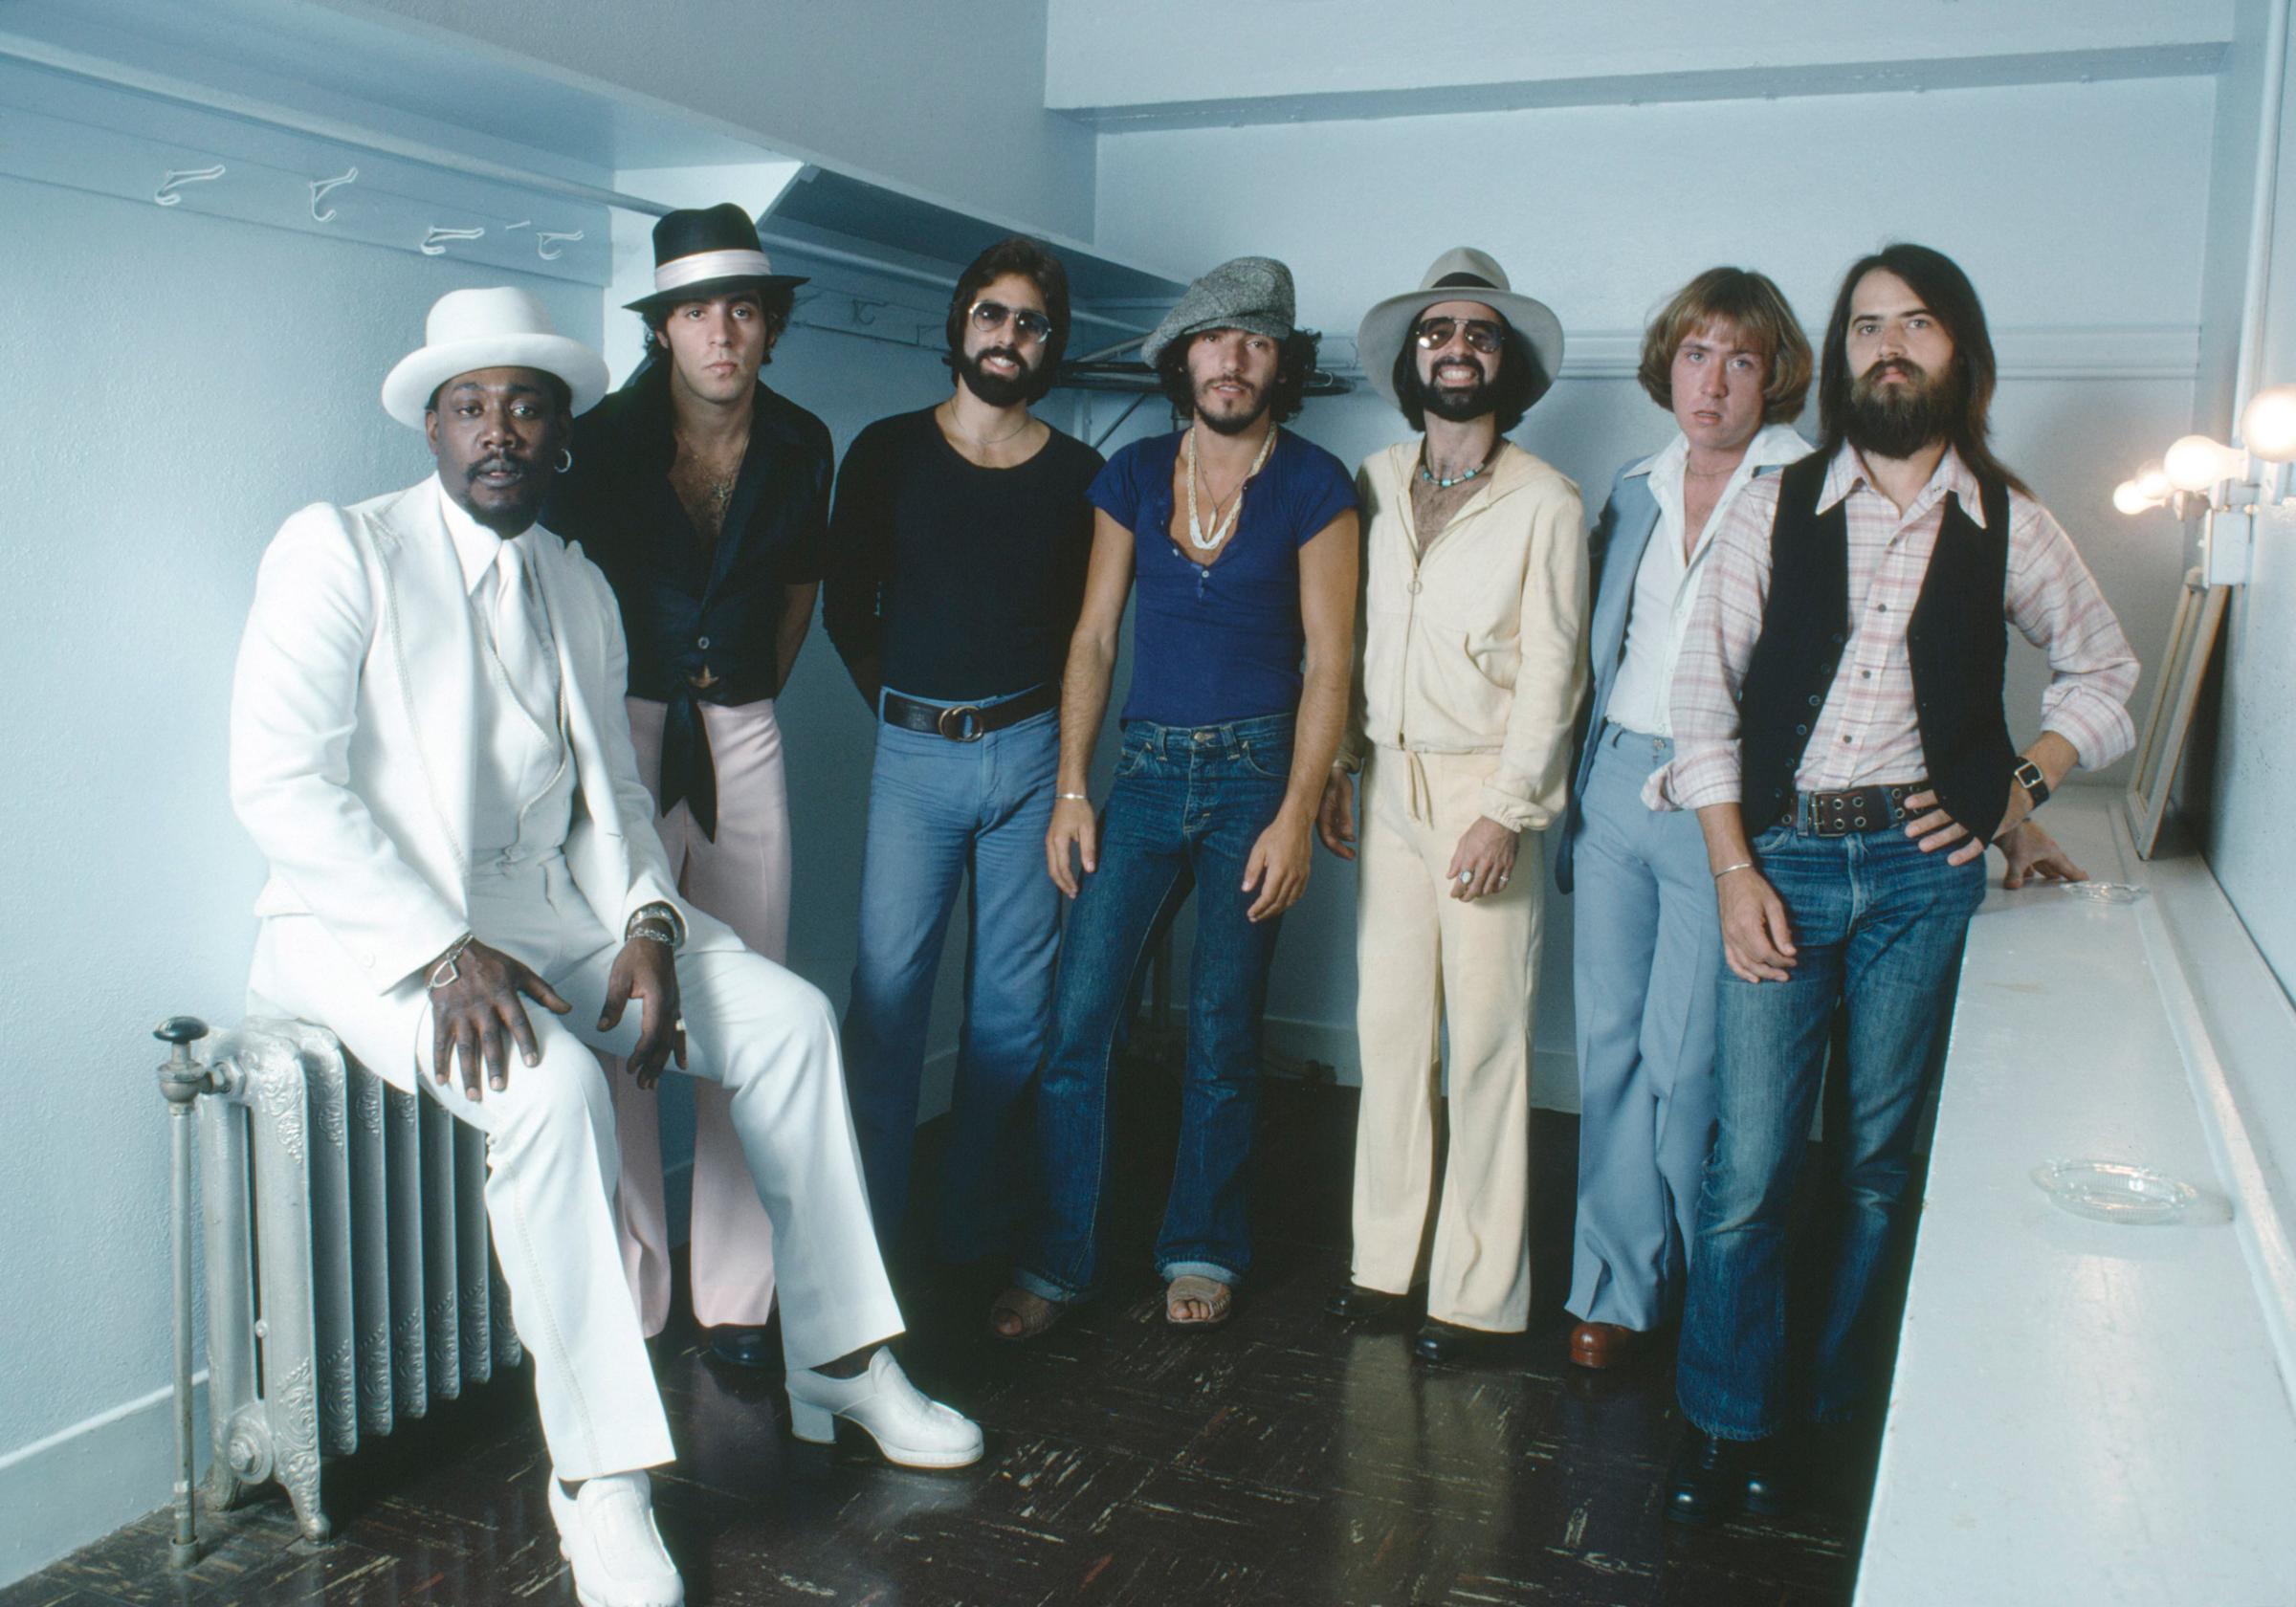 BRUCE SPRINGSTEEN & THE E STREET BAND 1975